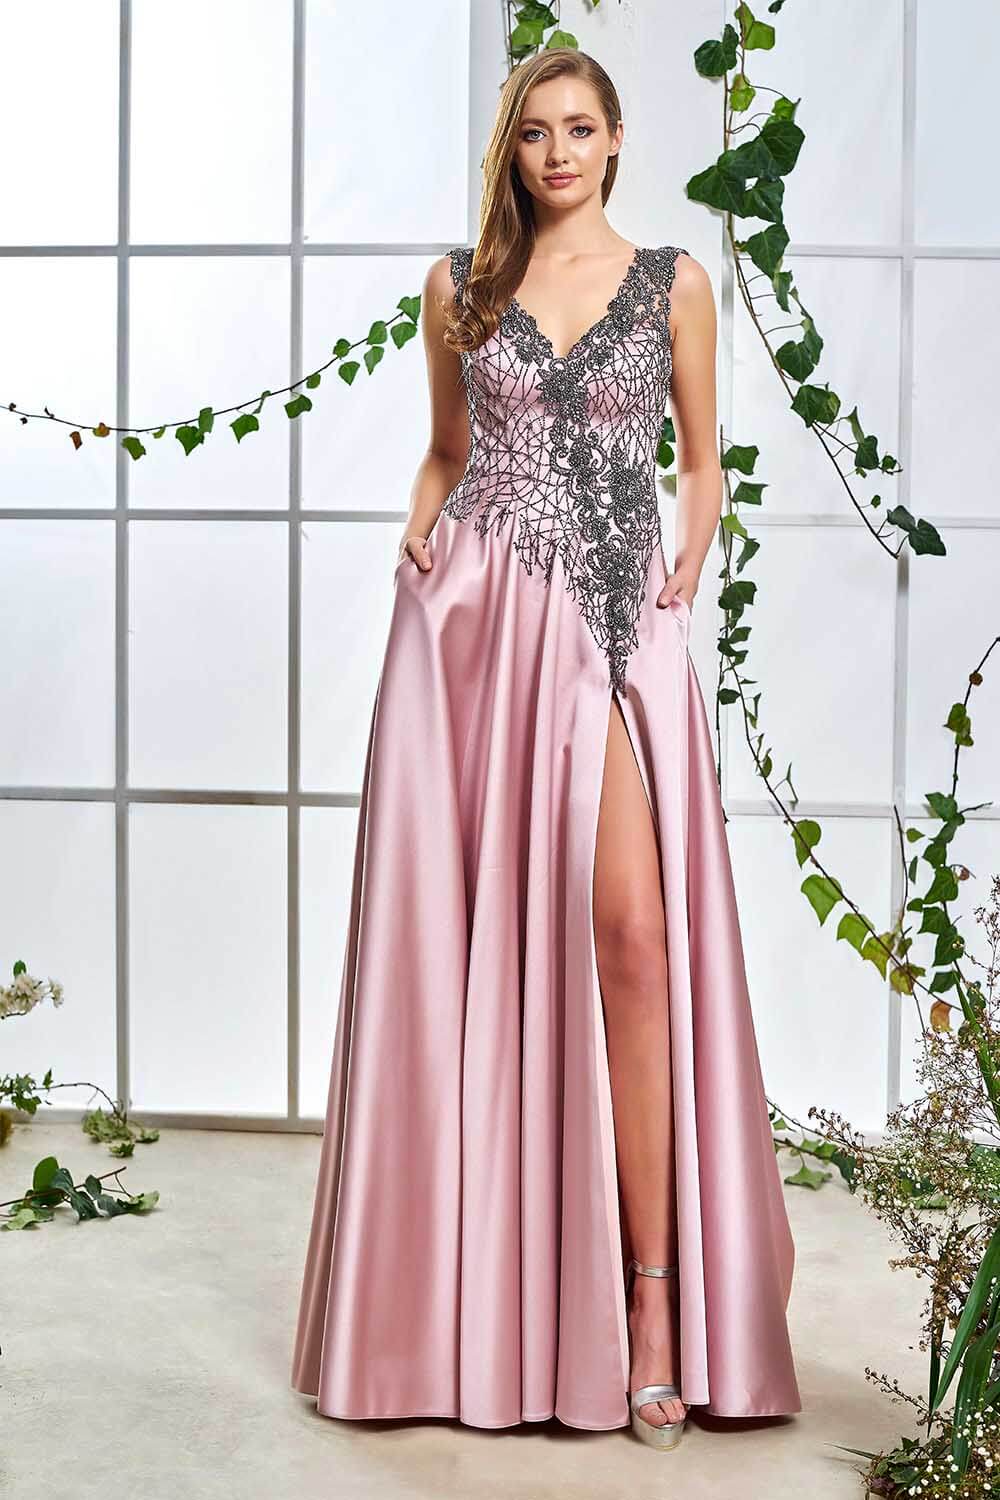 Deep Slit and Stone Dust Pink Long Evening Dress